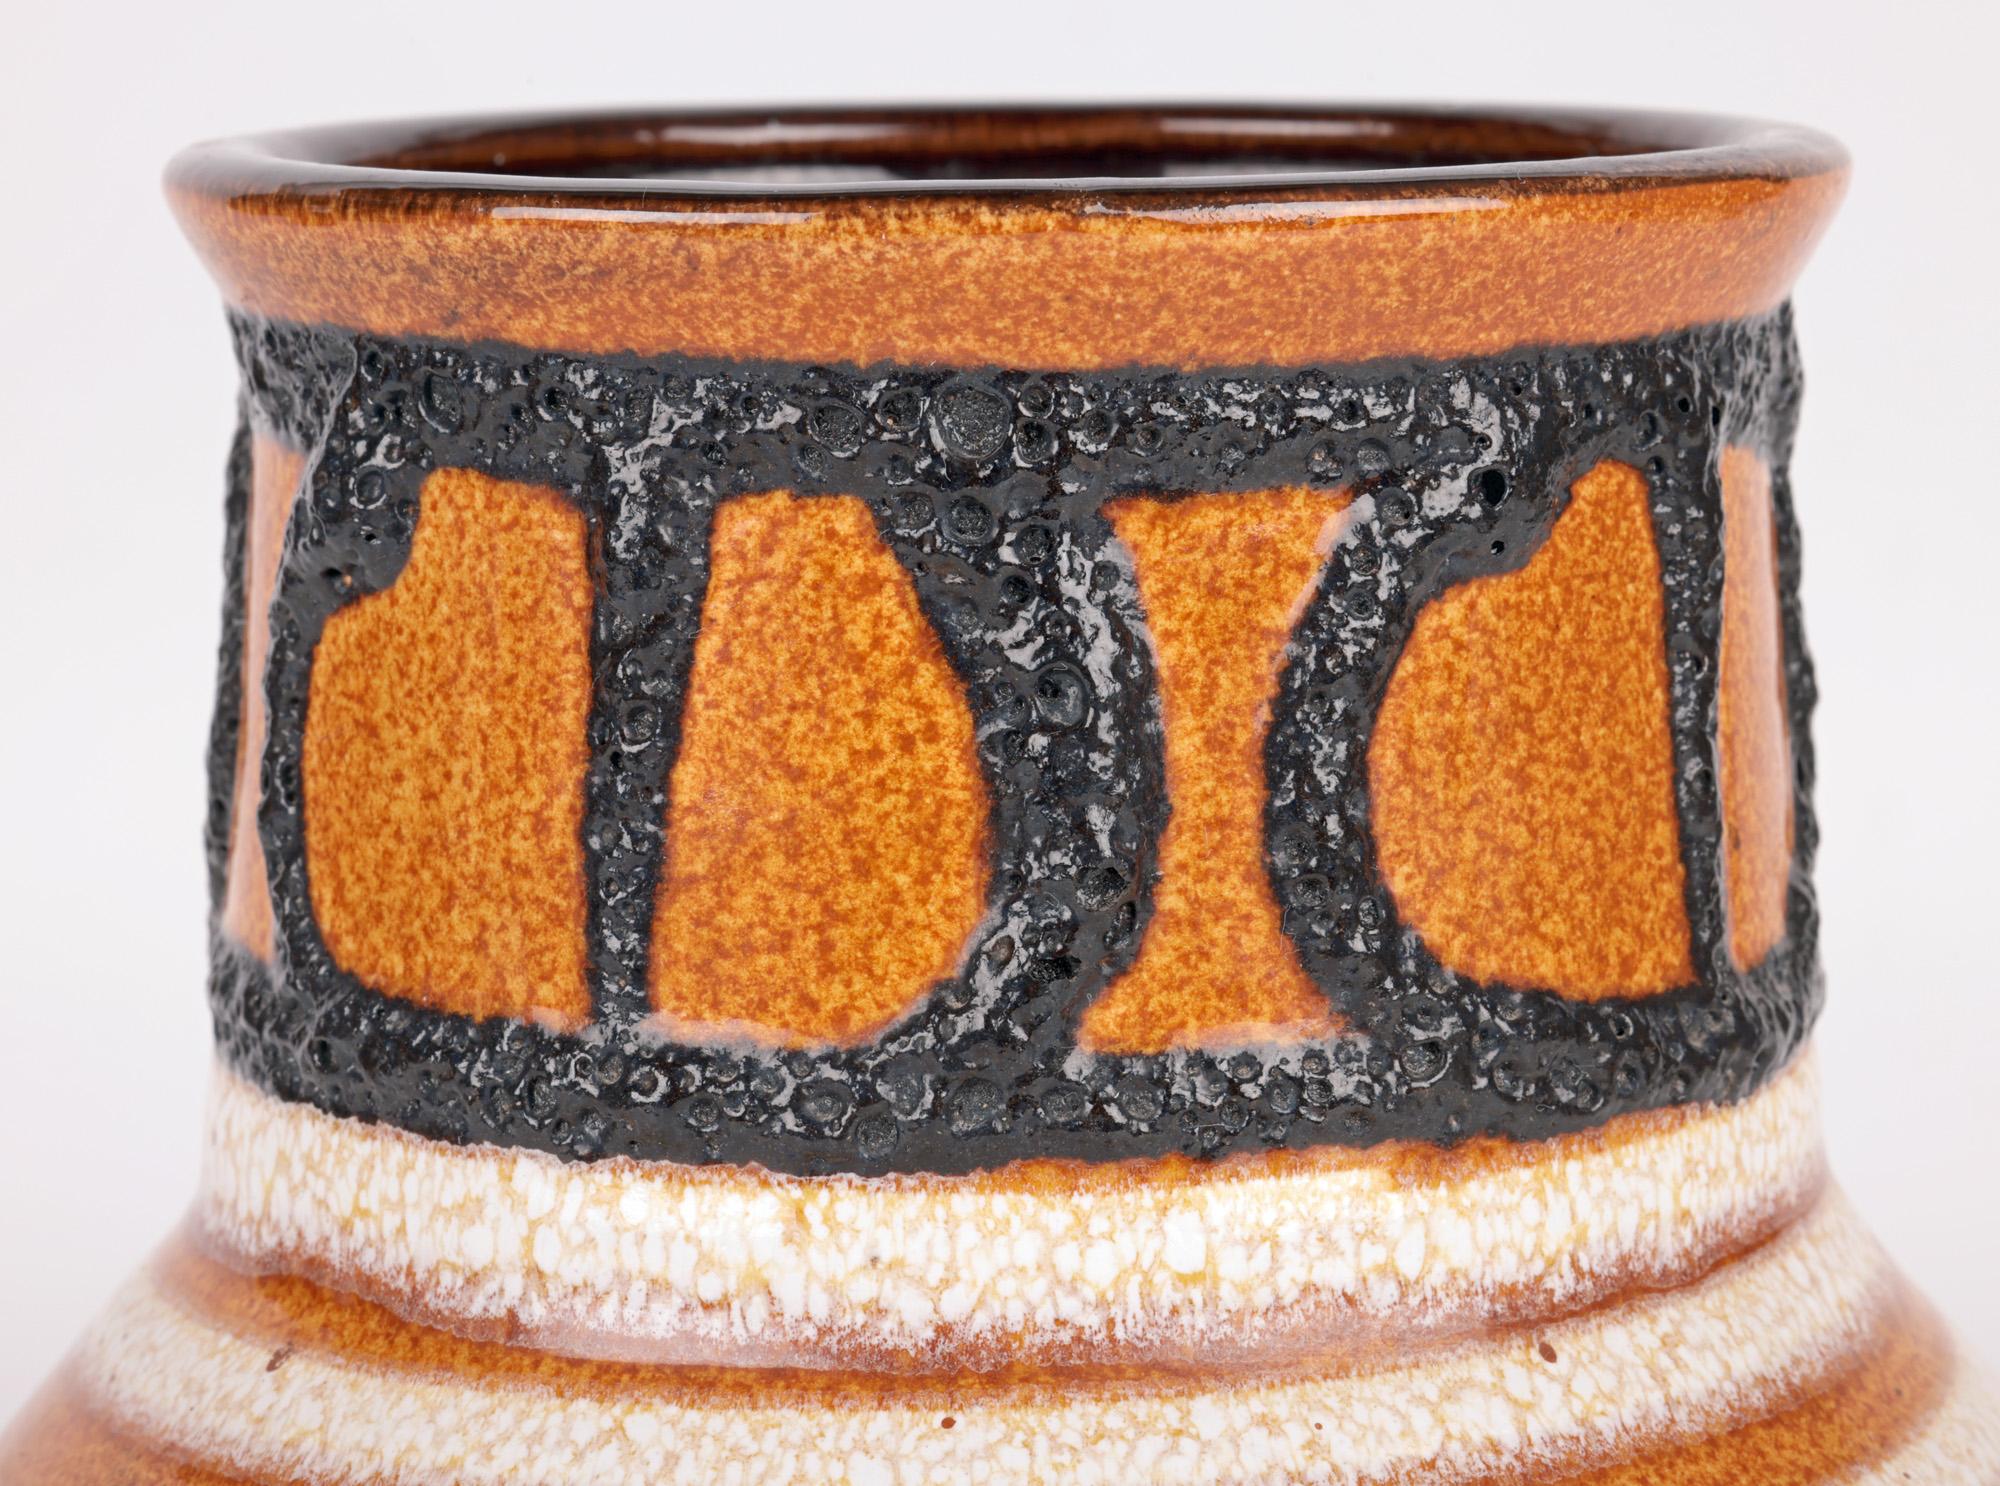 A stylish and finely made German mid-century art pottery cylindrical shaped vase decorated with applied lava glazed patterning by Scheurich Keramik and dating from around 1960. The vase stands on a wide round unglazed foot with slightly recessed